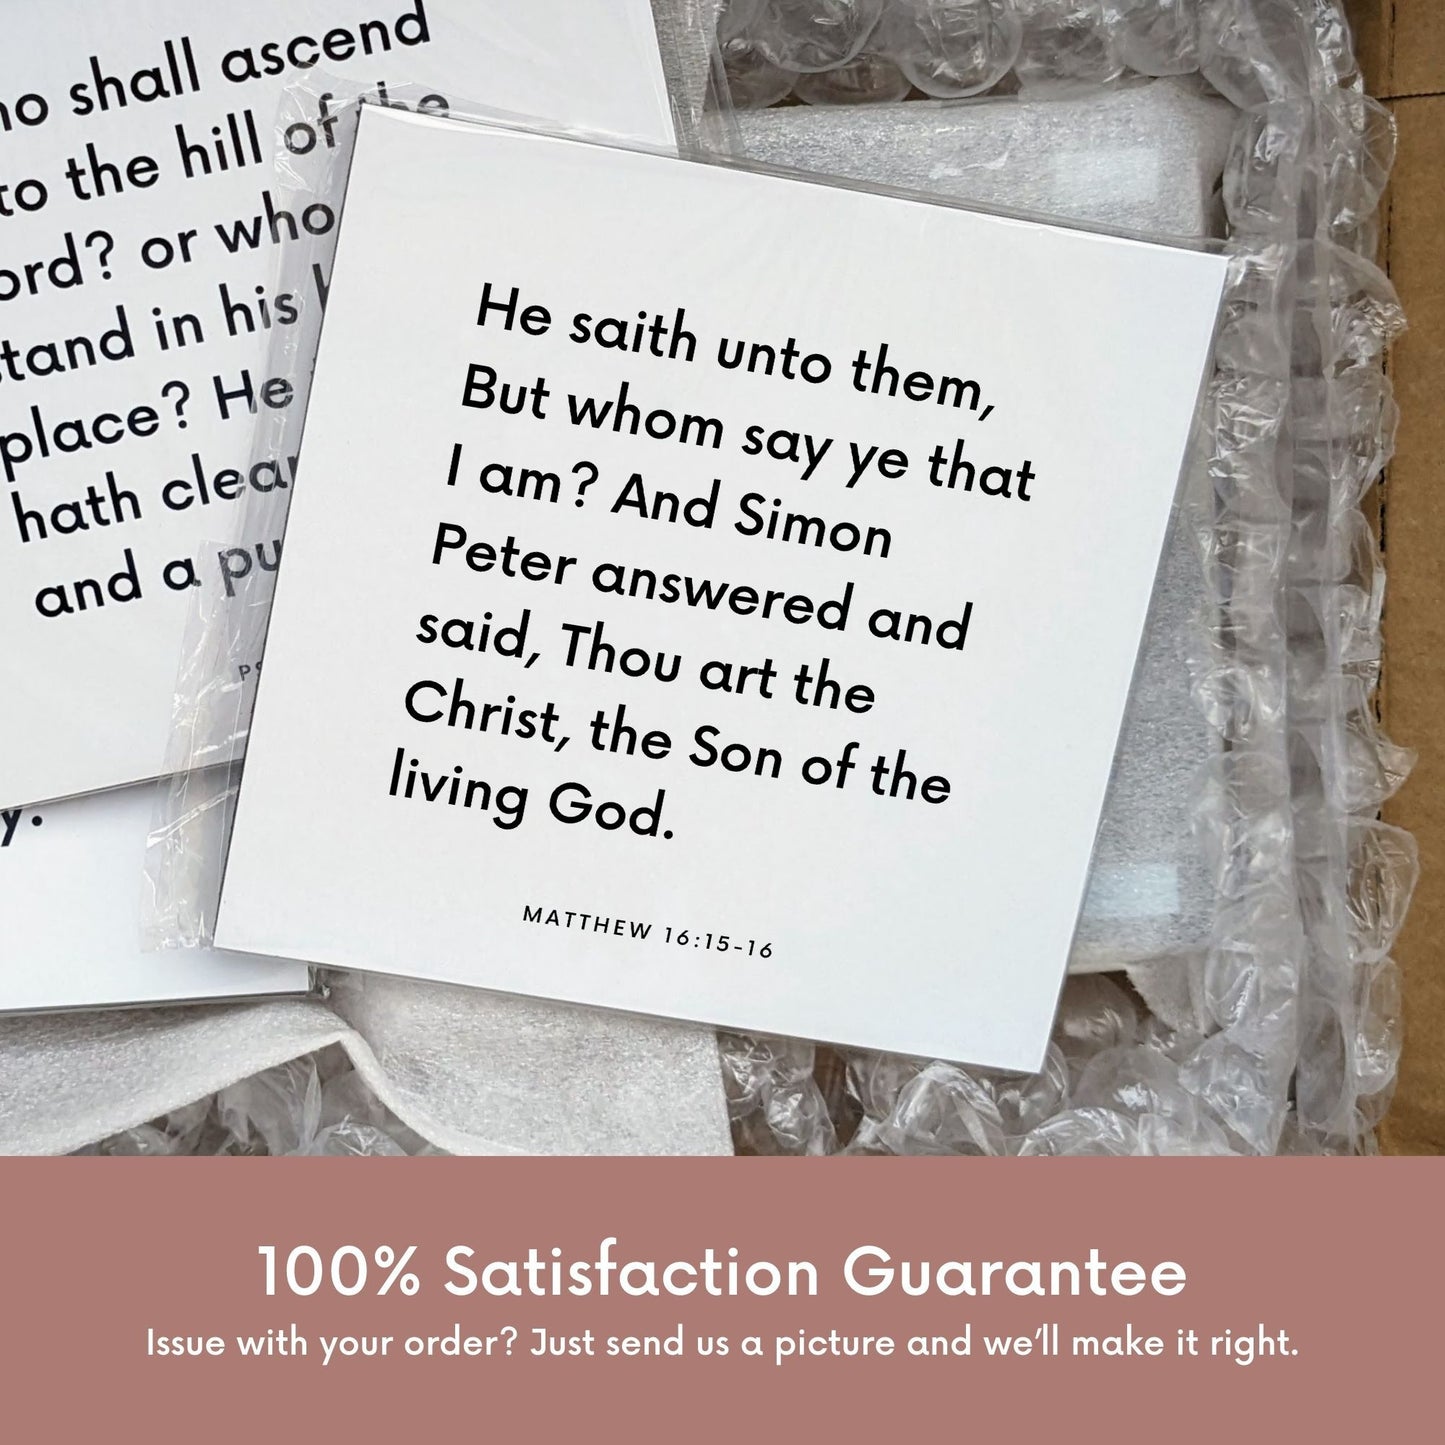 Shipping materials for scripture tile of Matthew 16:15-16 - "Thou art the Christ, the Son of the living God"